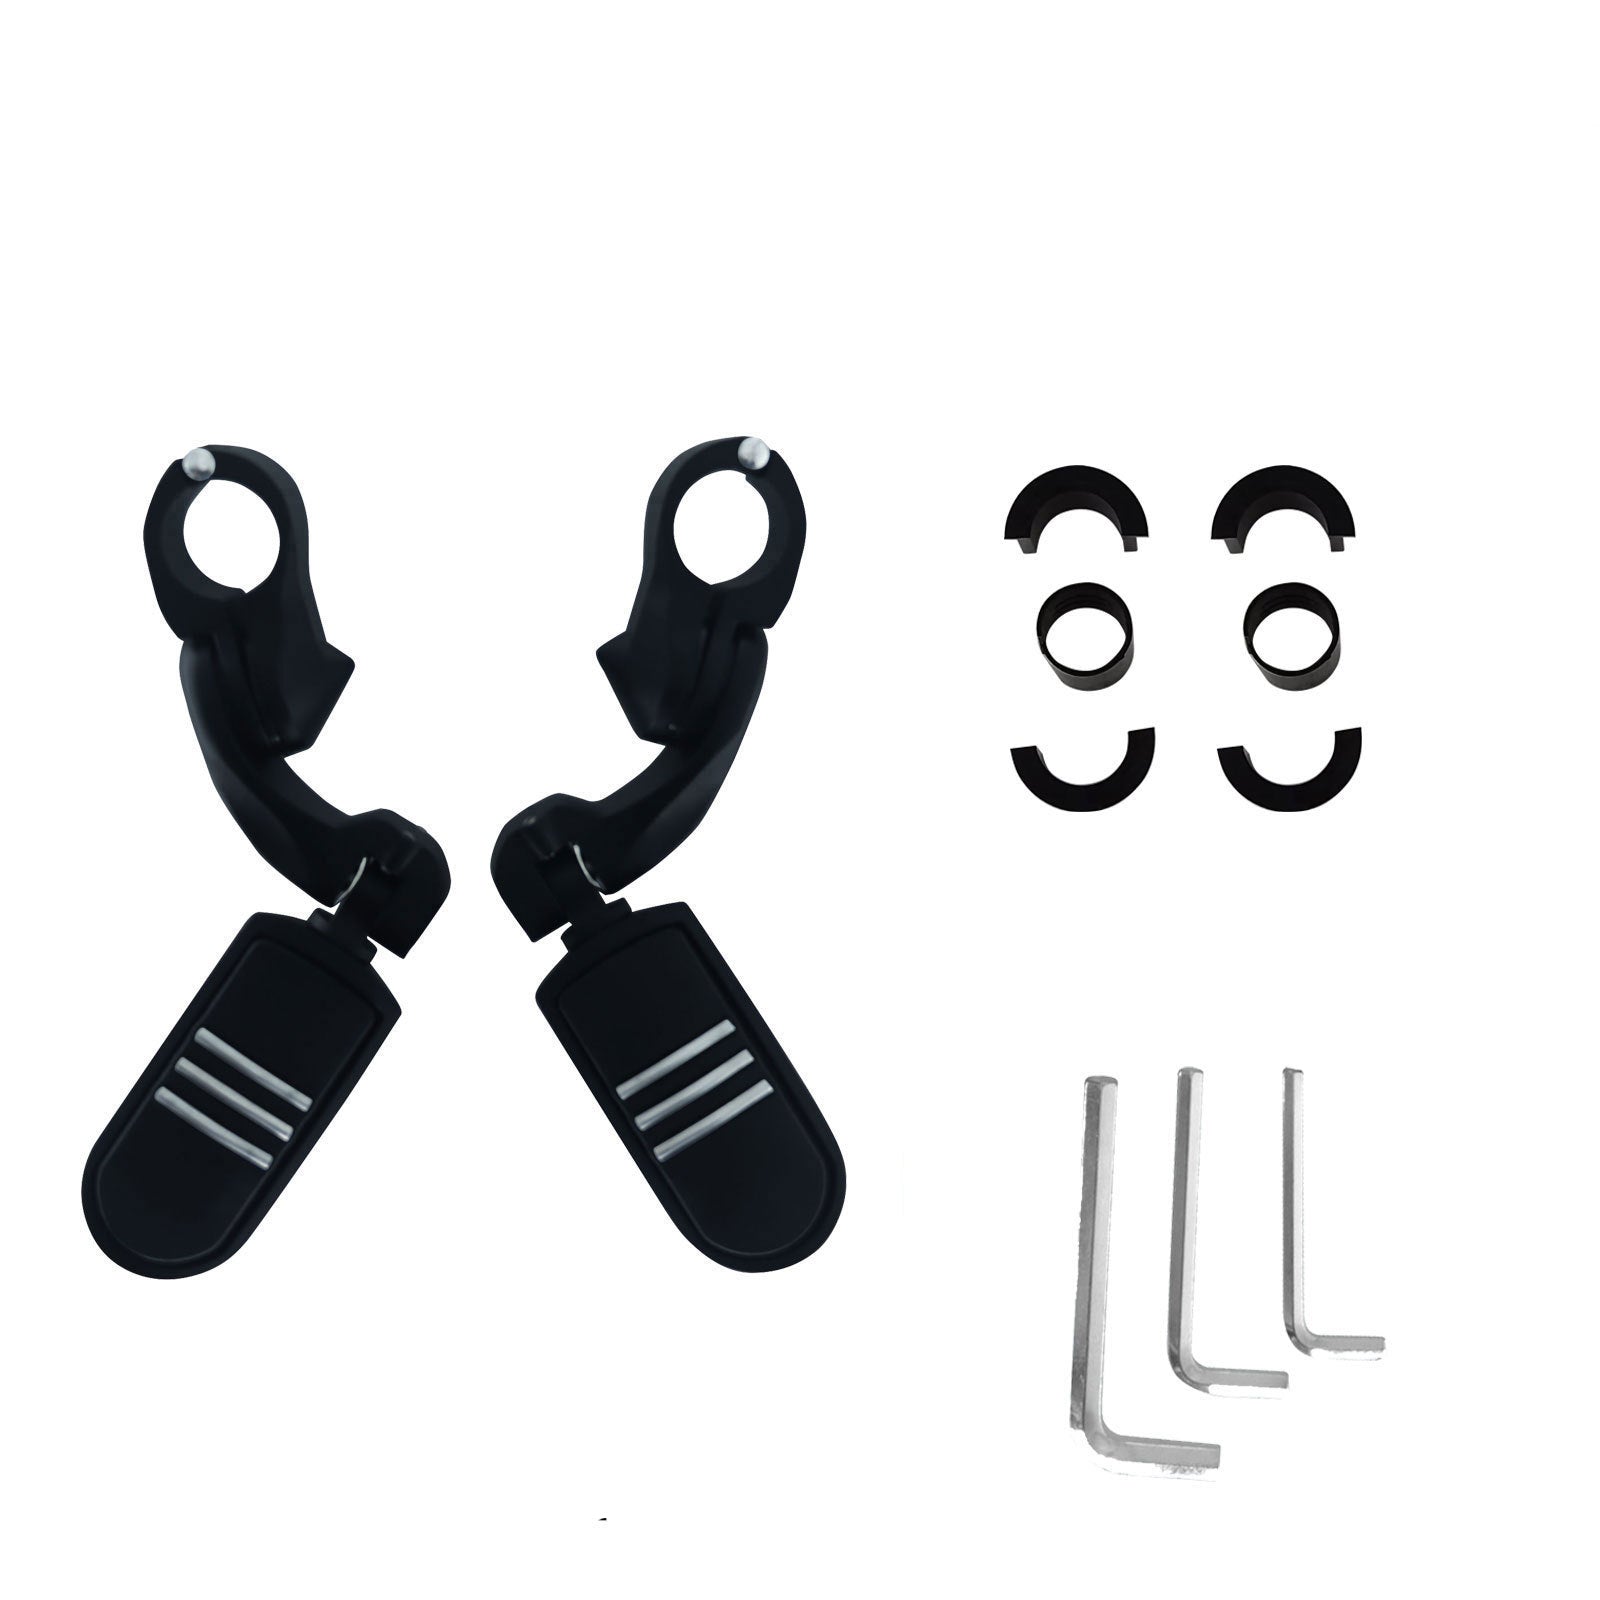 Universal Motorcycle Foot Pegs for Front and Rear Use